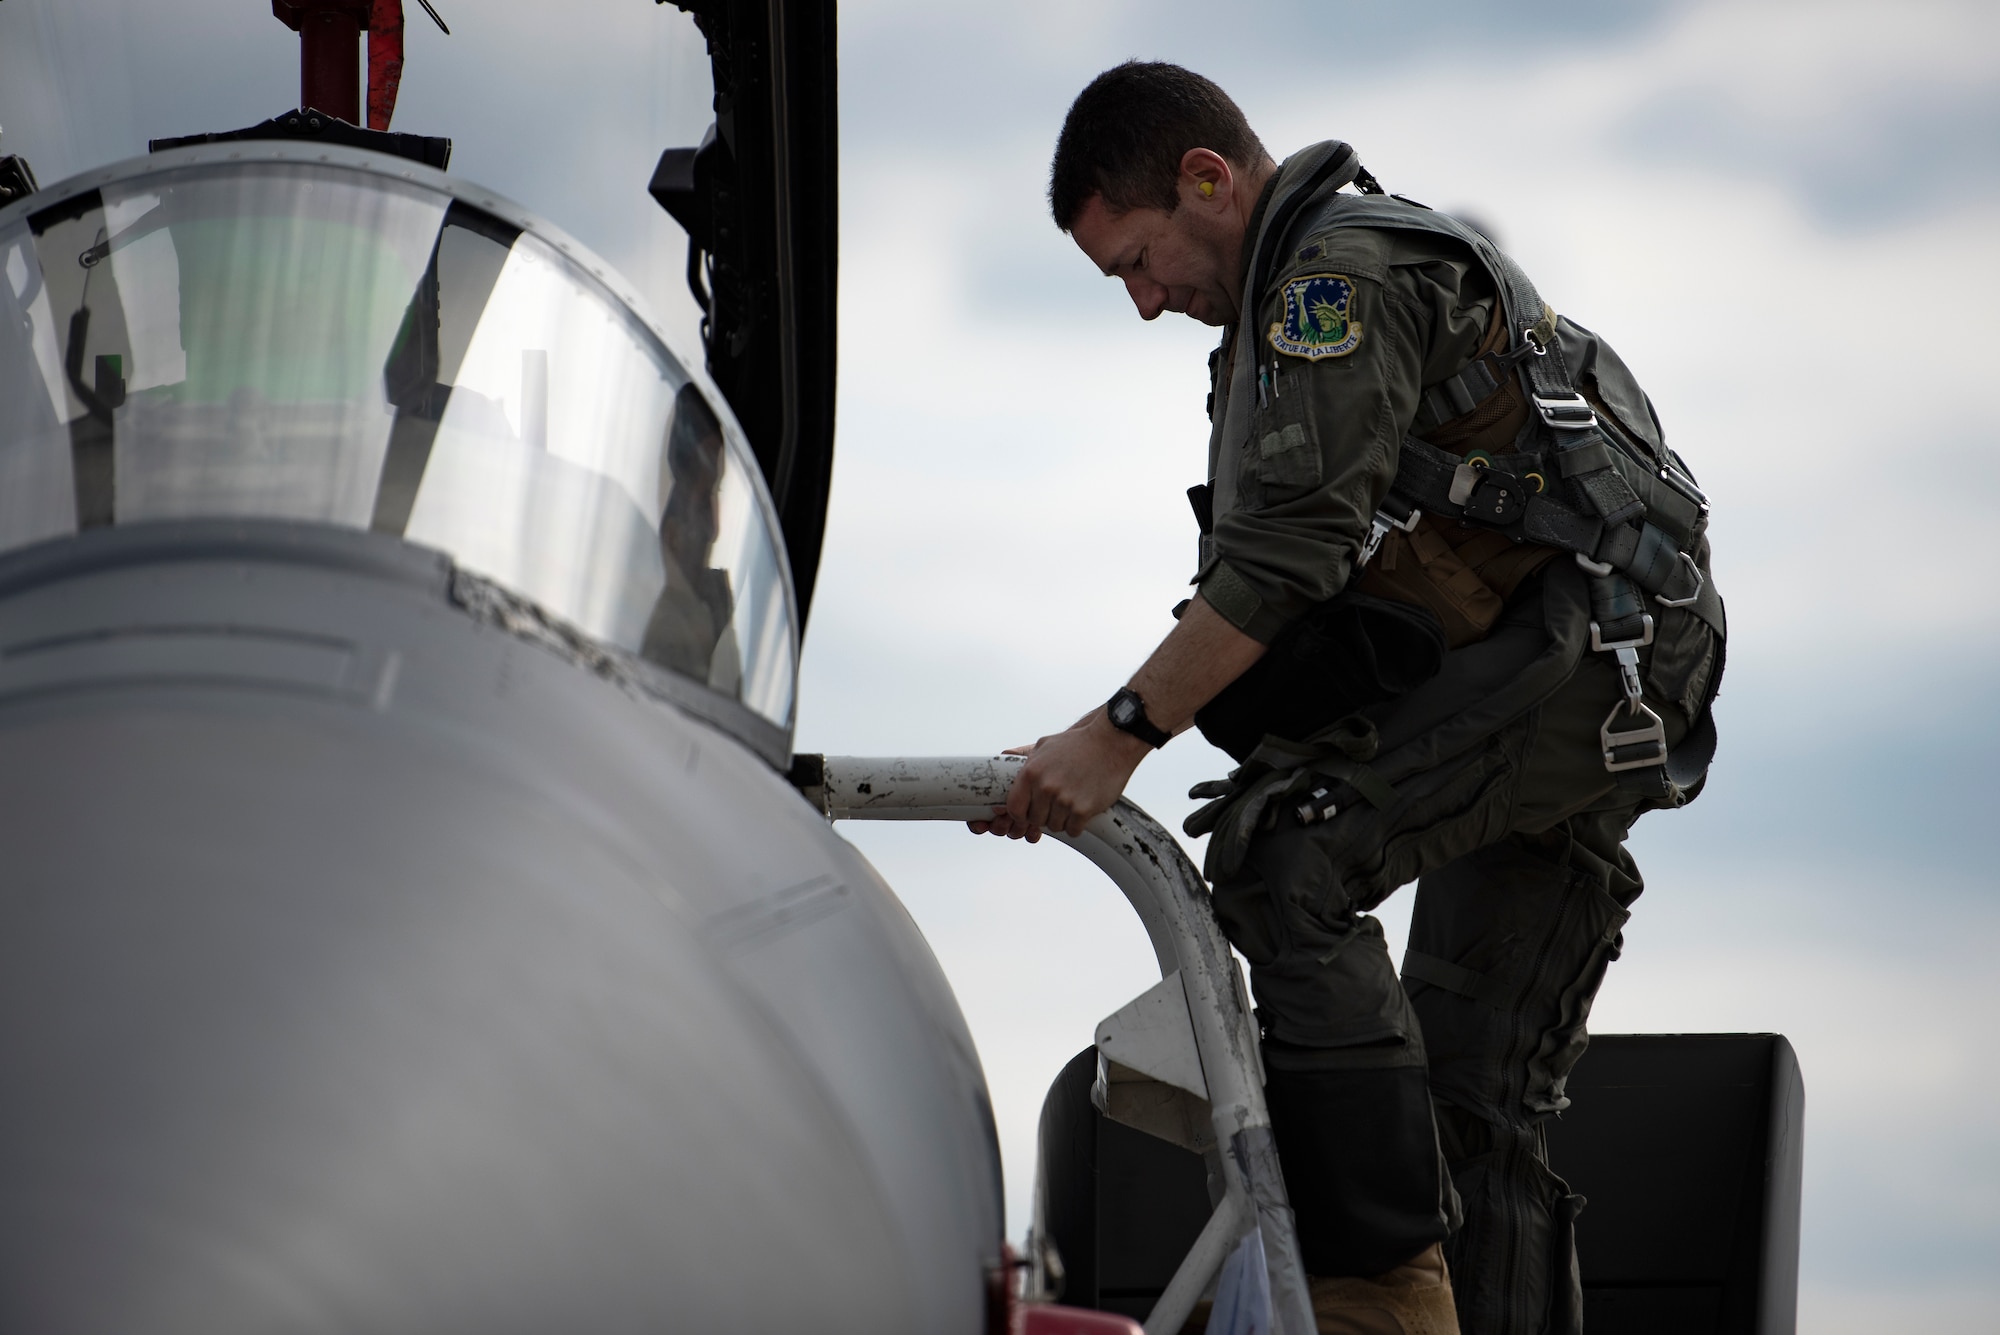 A U.S. Air Force pilot, assigned to the 494th Fighter Squadron, descends from his F-15E Strike Eagle after a training sortie at Royal Air Force Lakenheath, England, Sept. 2, 2020. The 494th FS conducts routine training to ensure the Liberty Wing brings unique air combat capabilities to the fight when called upon by U.S. Air Forces in Europe-Air Forces Africa. (U.S. Air Force phtot by Airman 1st Class Jessi Monte)